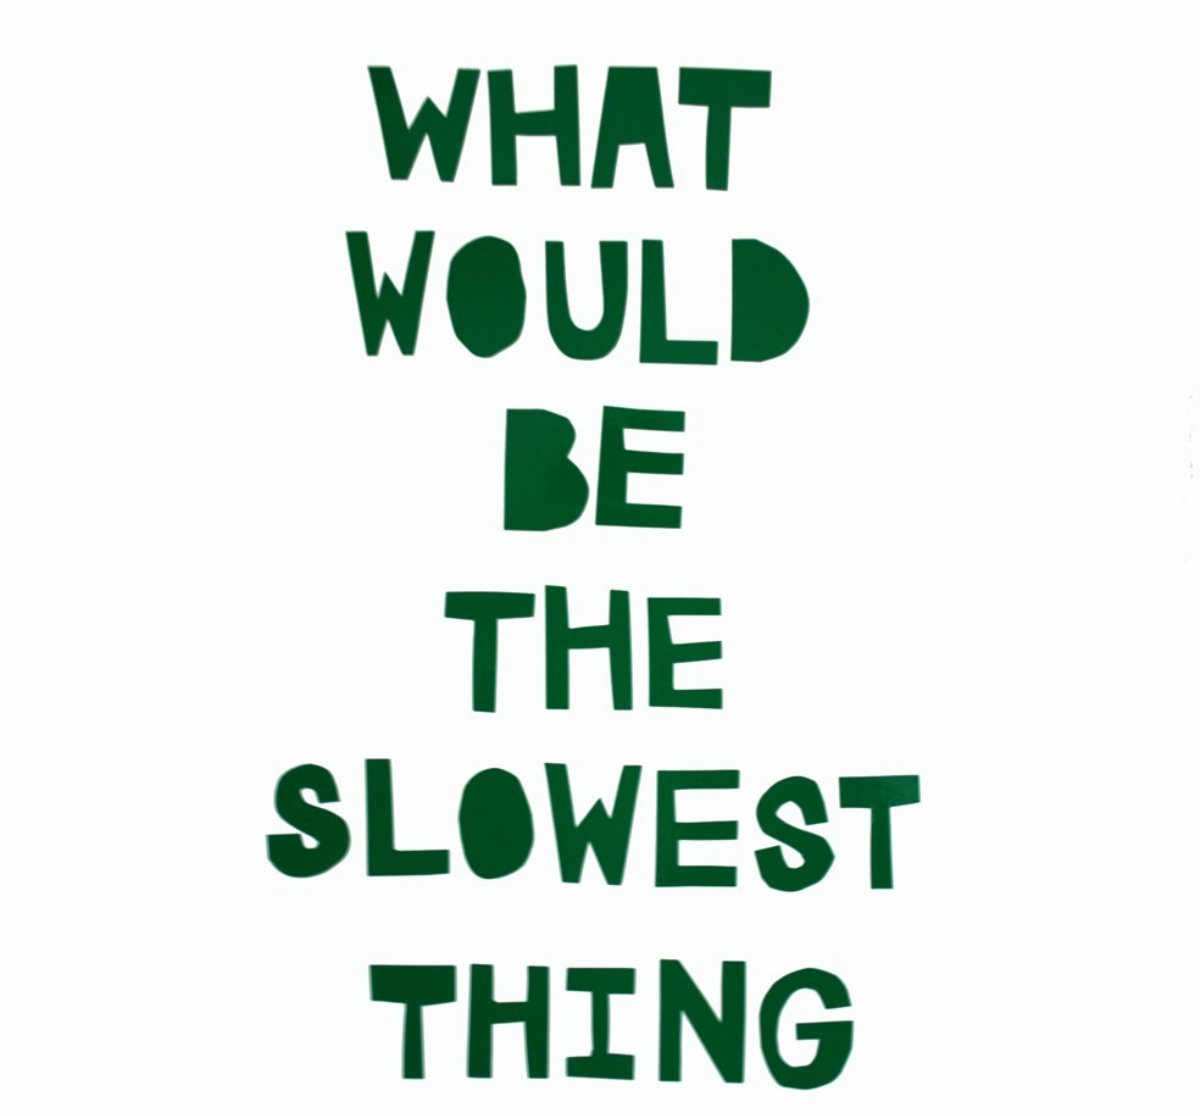 Graphic with the text that says "What would be the slowest thing"